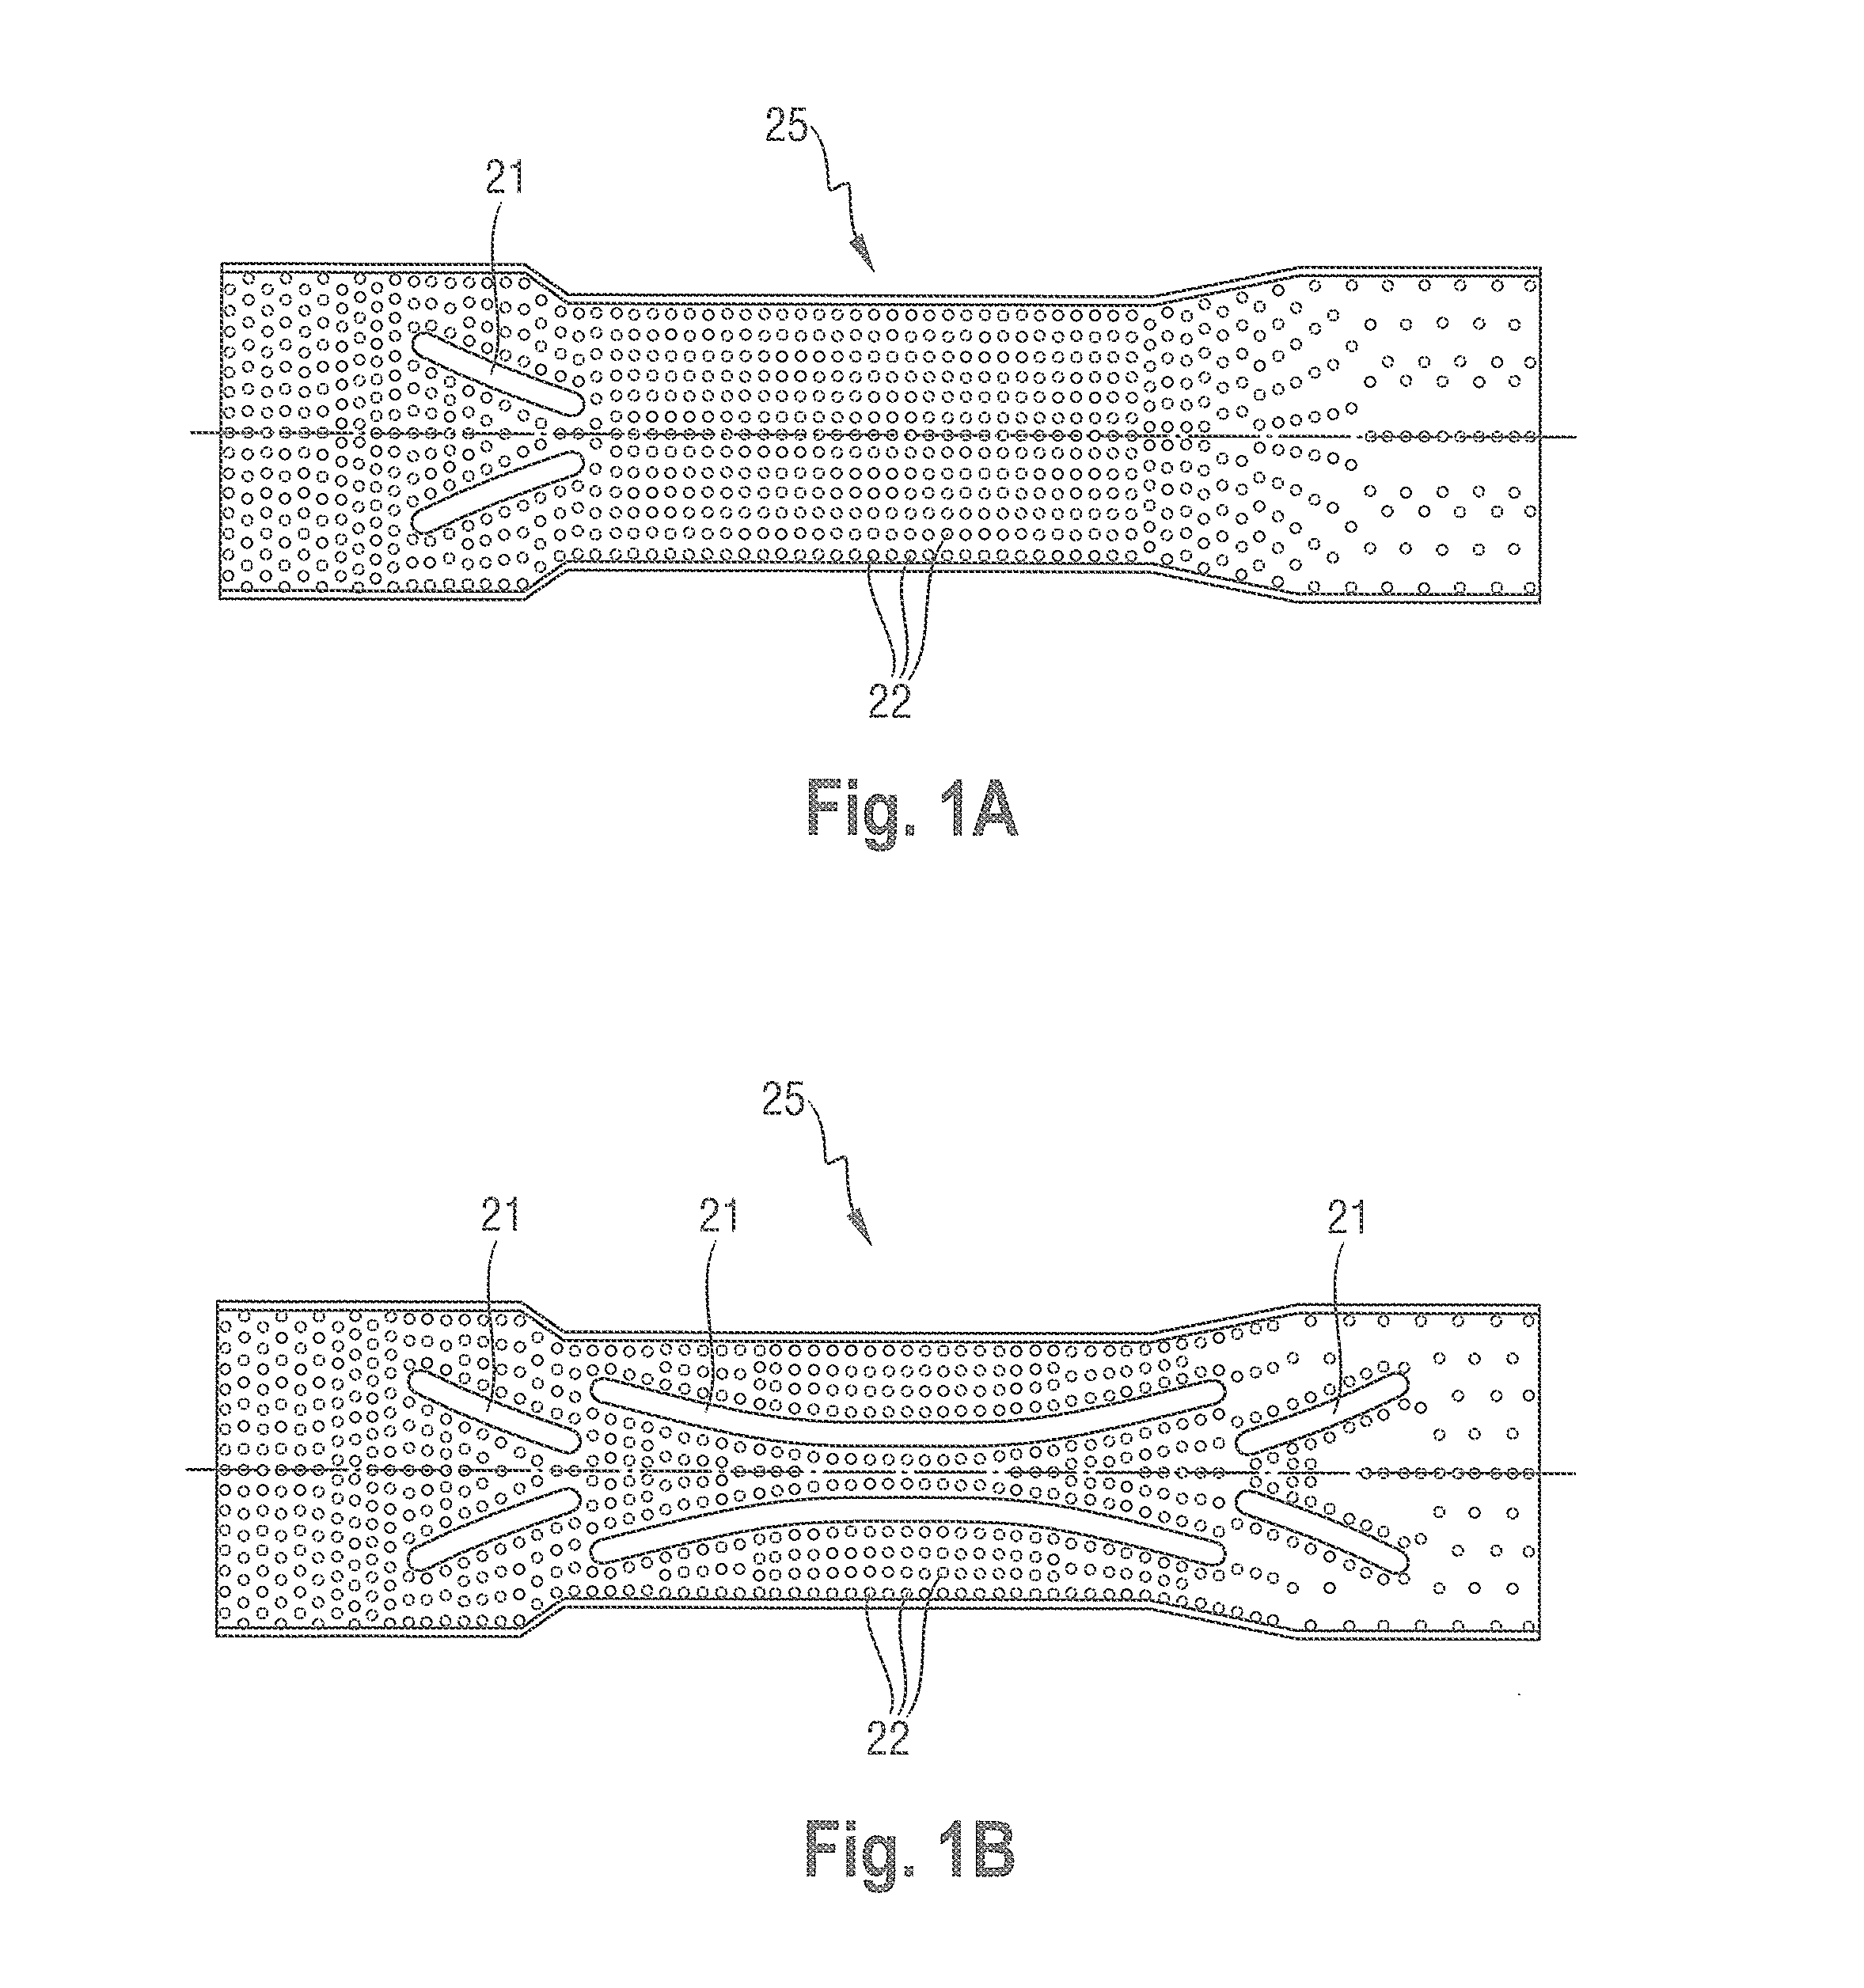 Method and Apparatus for Making Absorbent Structures with Absorbent Material